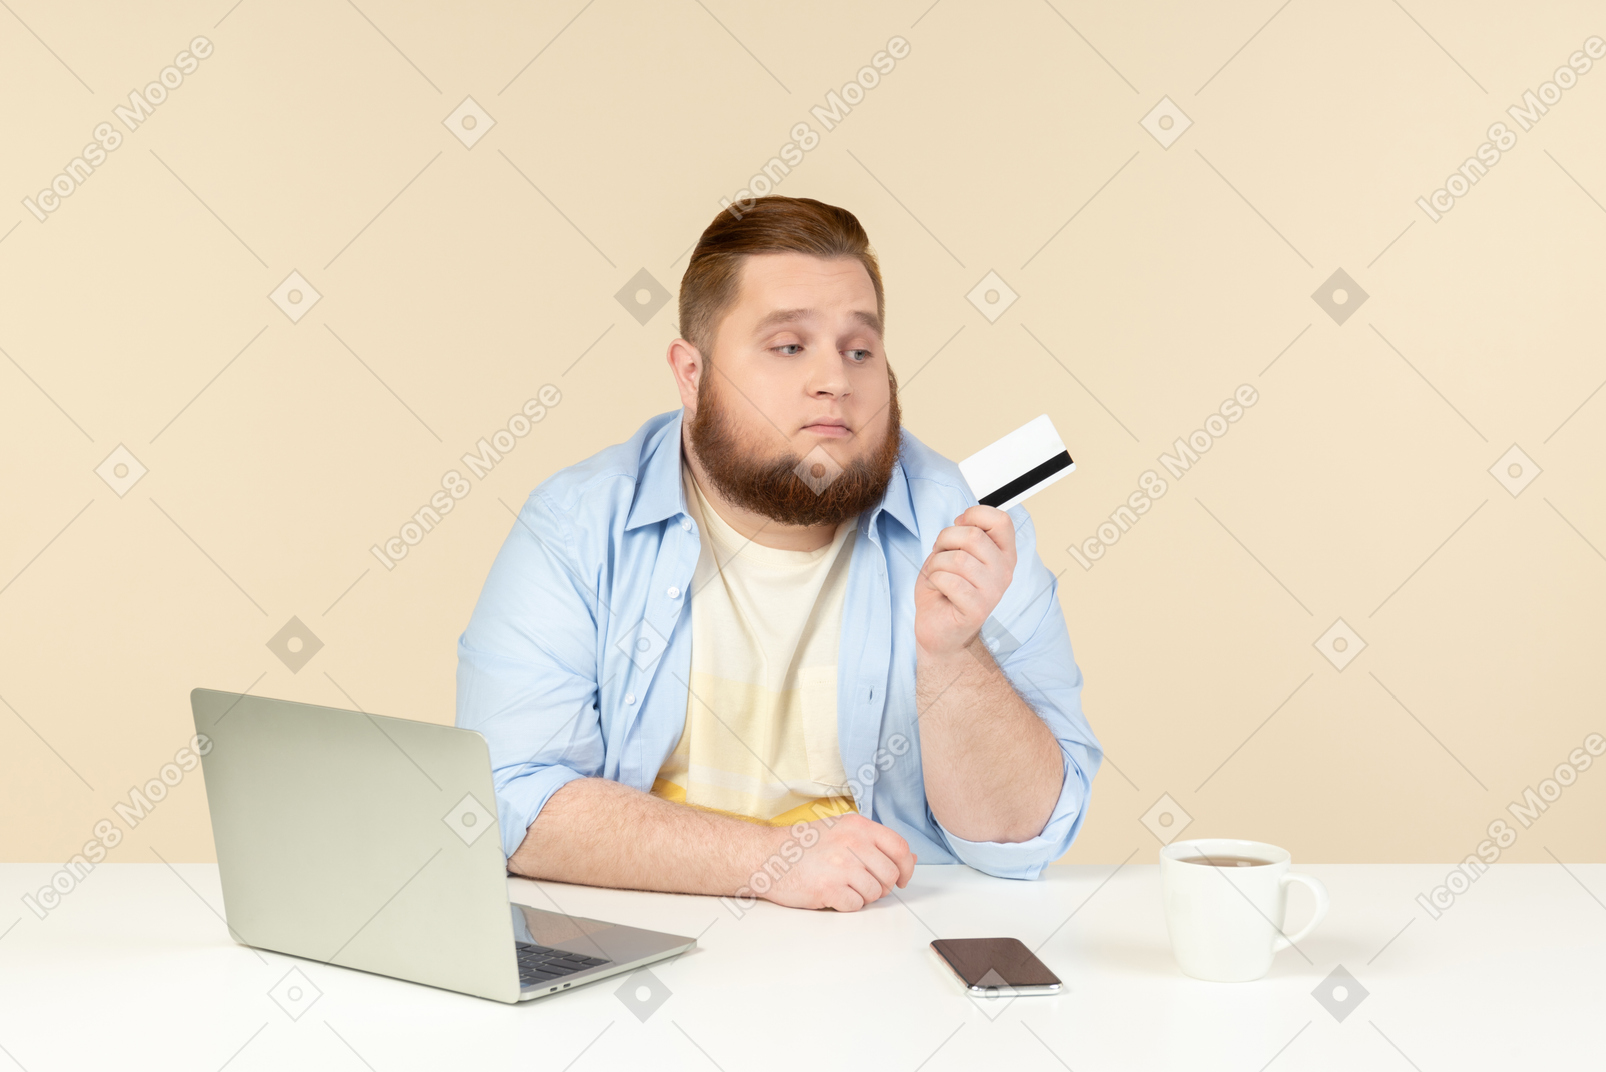 Sad looking young overweight man sitting at the desk and holding bank card